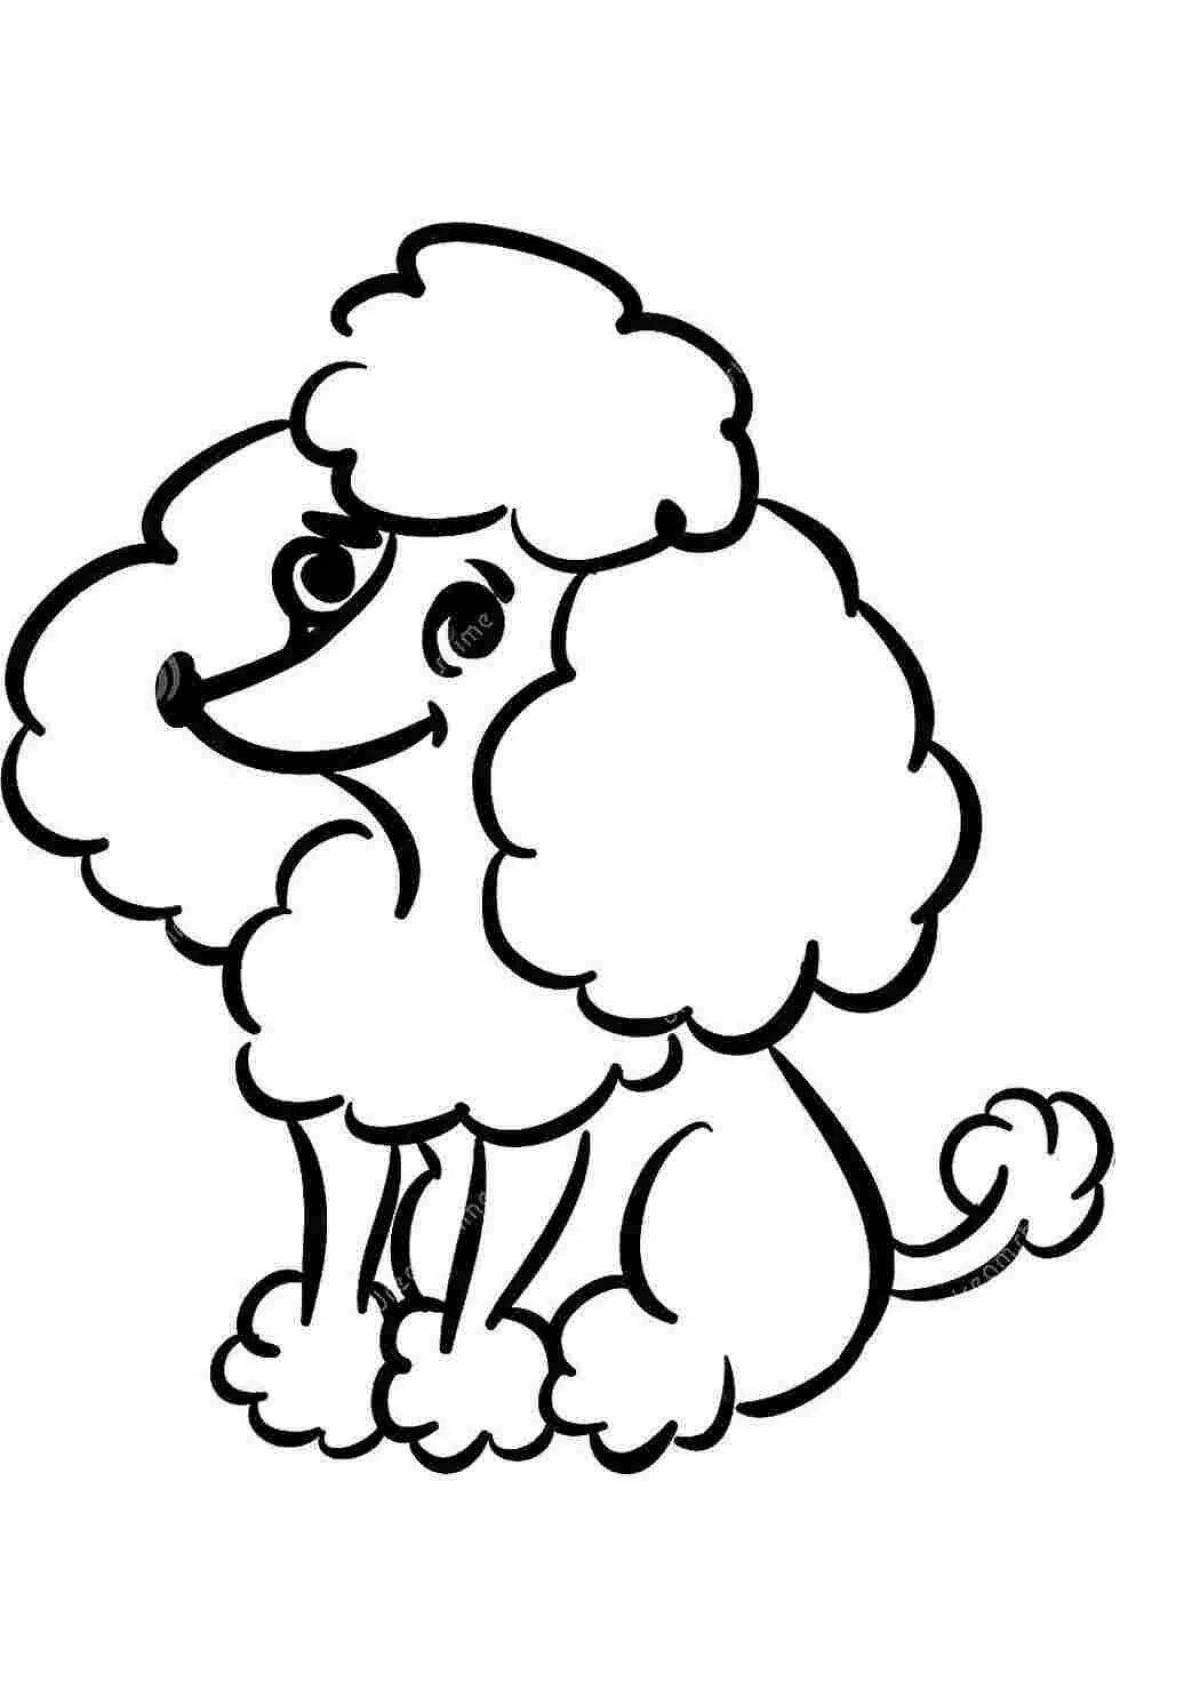 Animated poodle coloring page for kids